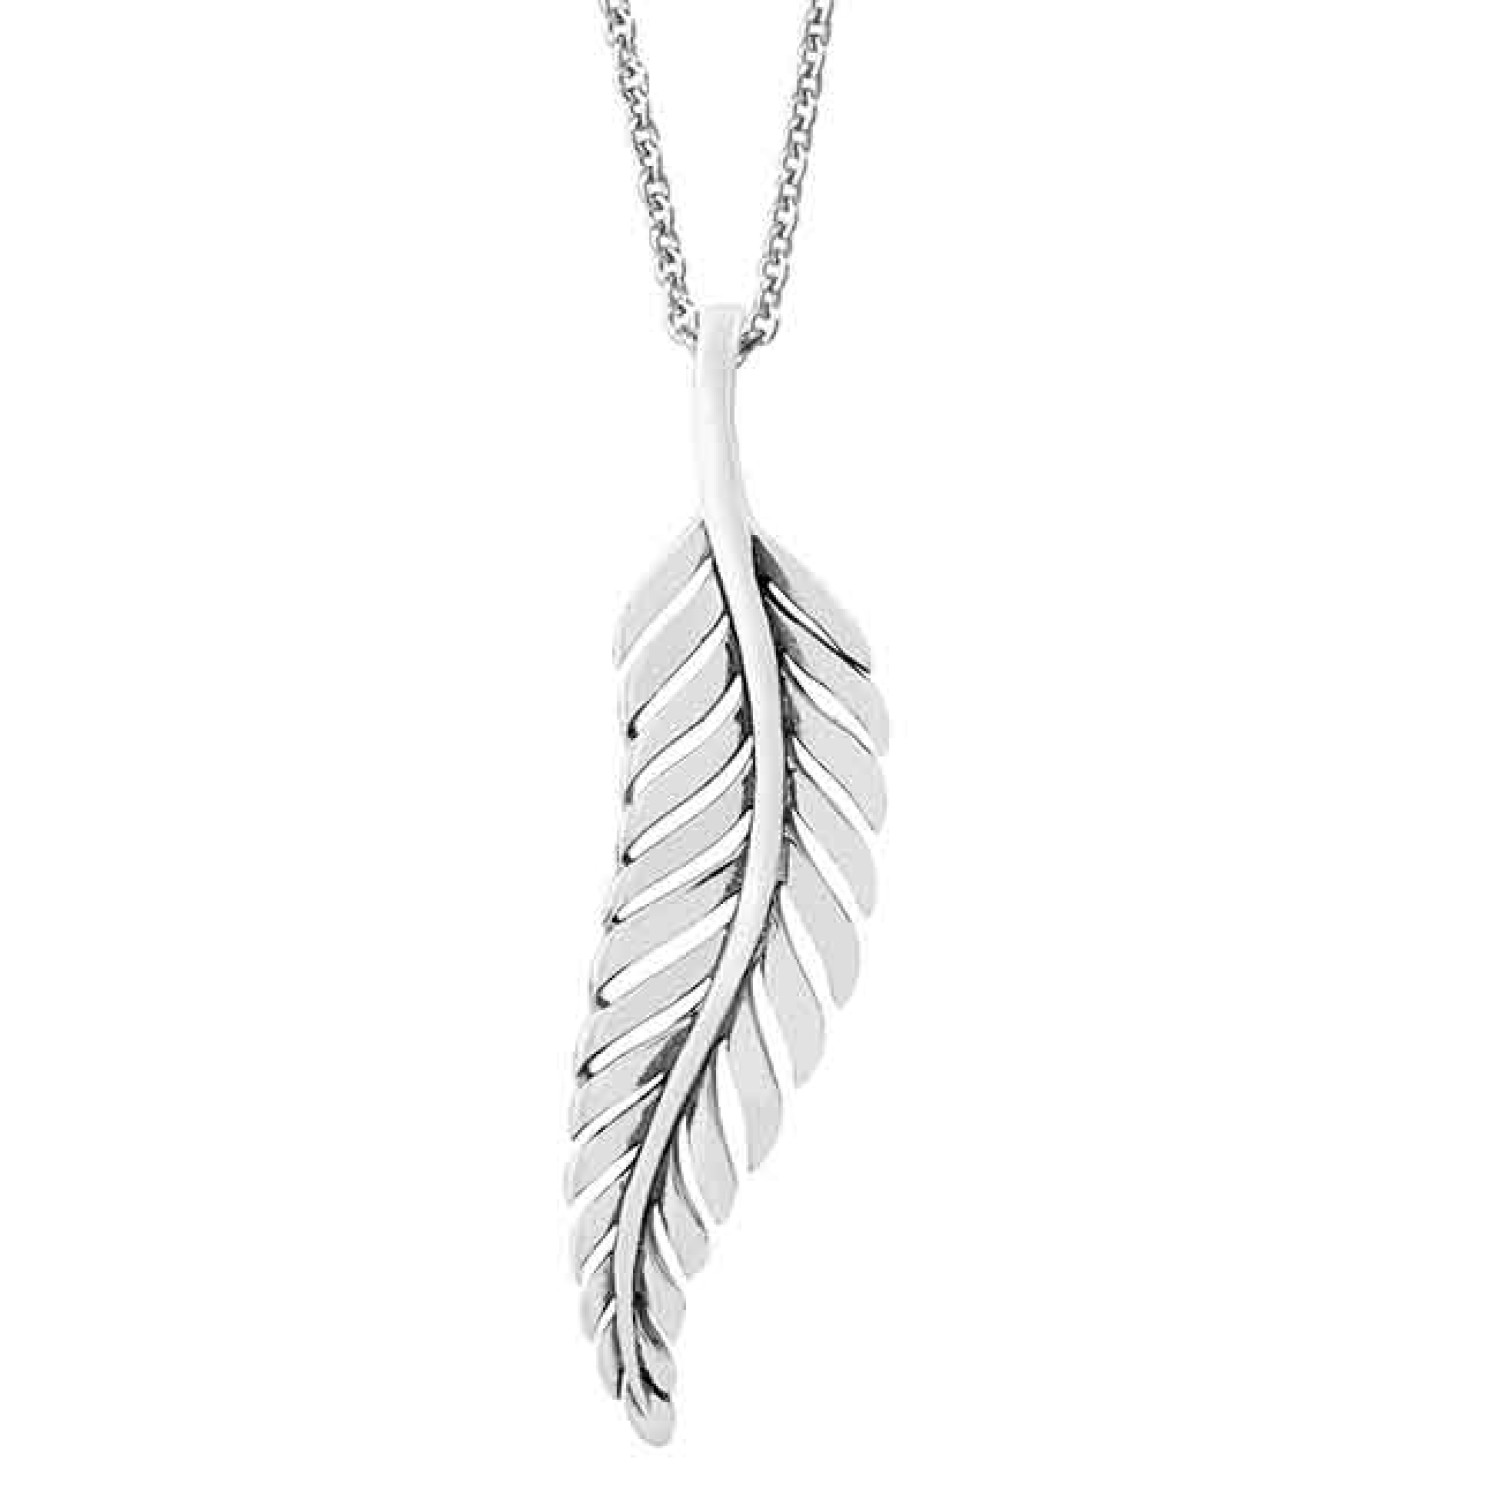 Evolve Forever Fern. The silver fern is widely used as a symbol by New Zealand national sports teams in various stylised forms. Silver Ferns is the name of the national netball team, and most other national womens sports teams have n @christies.online